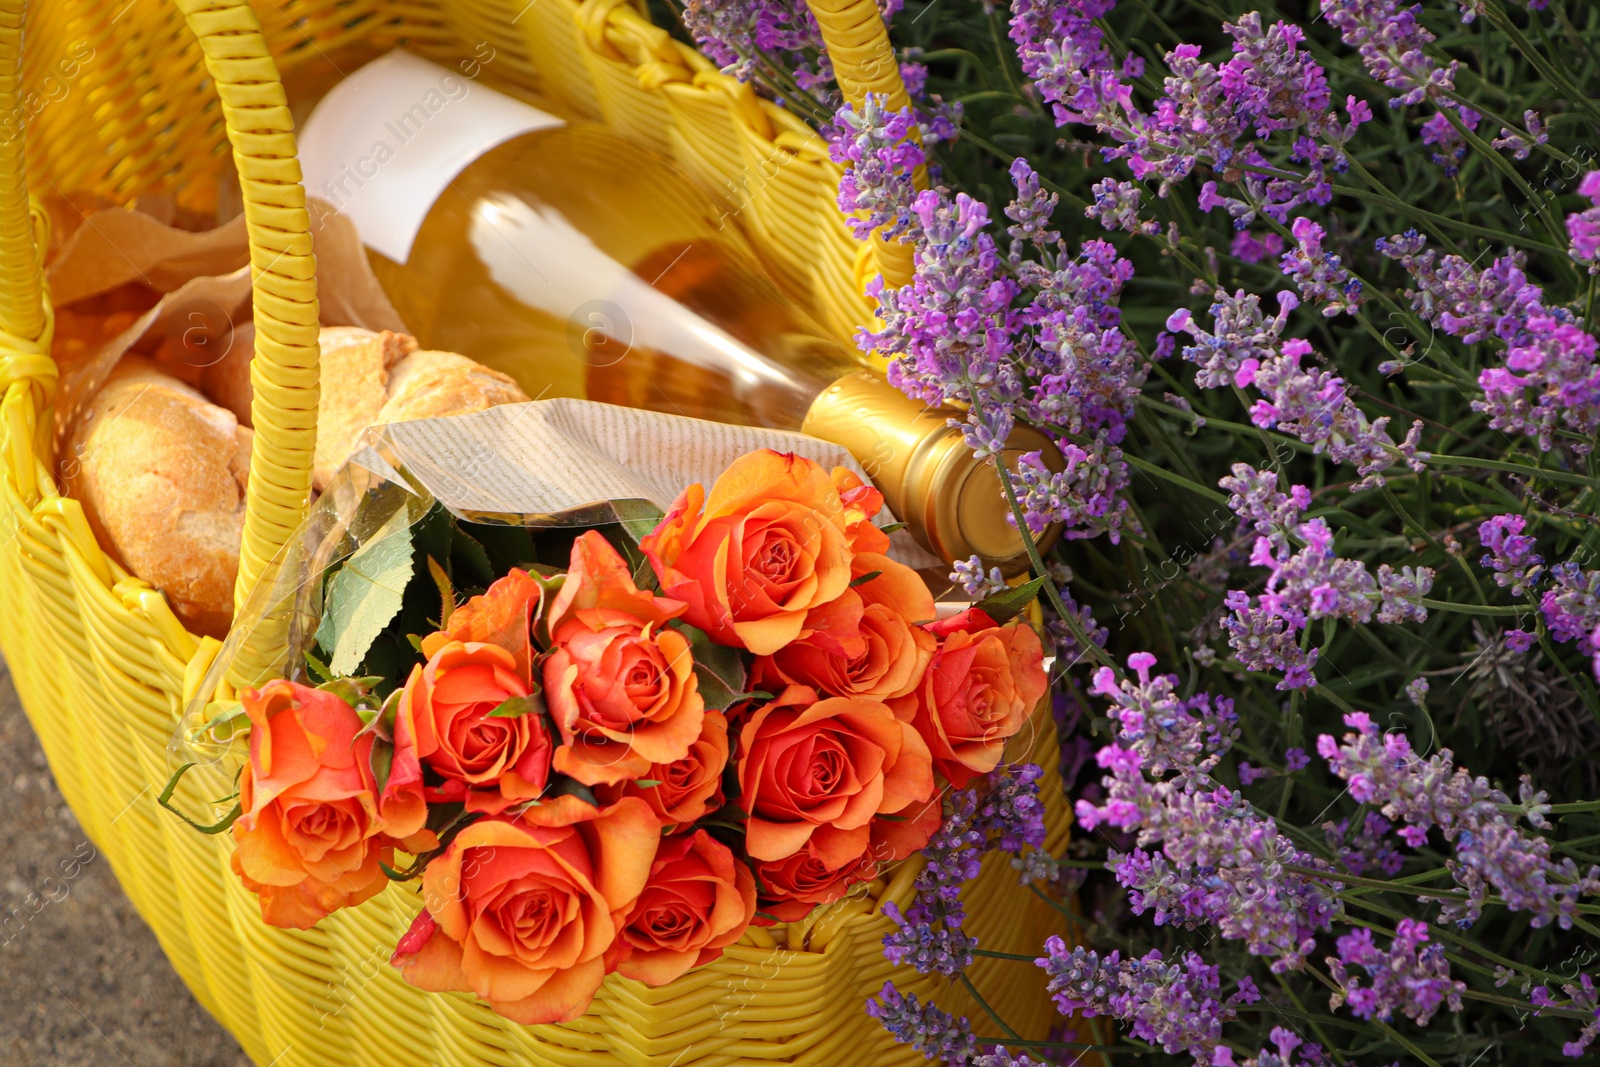 Photo of Yellow wicker bag with beautiful roses, bottle of wine and baguettes near lavender flowers outdoors, above view